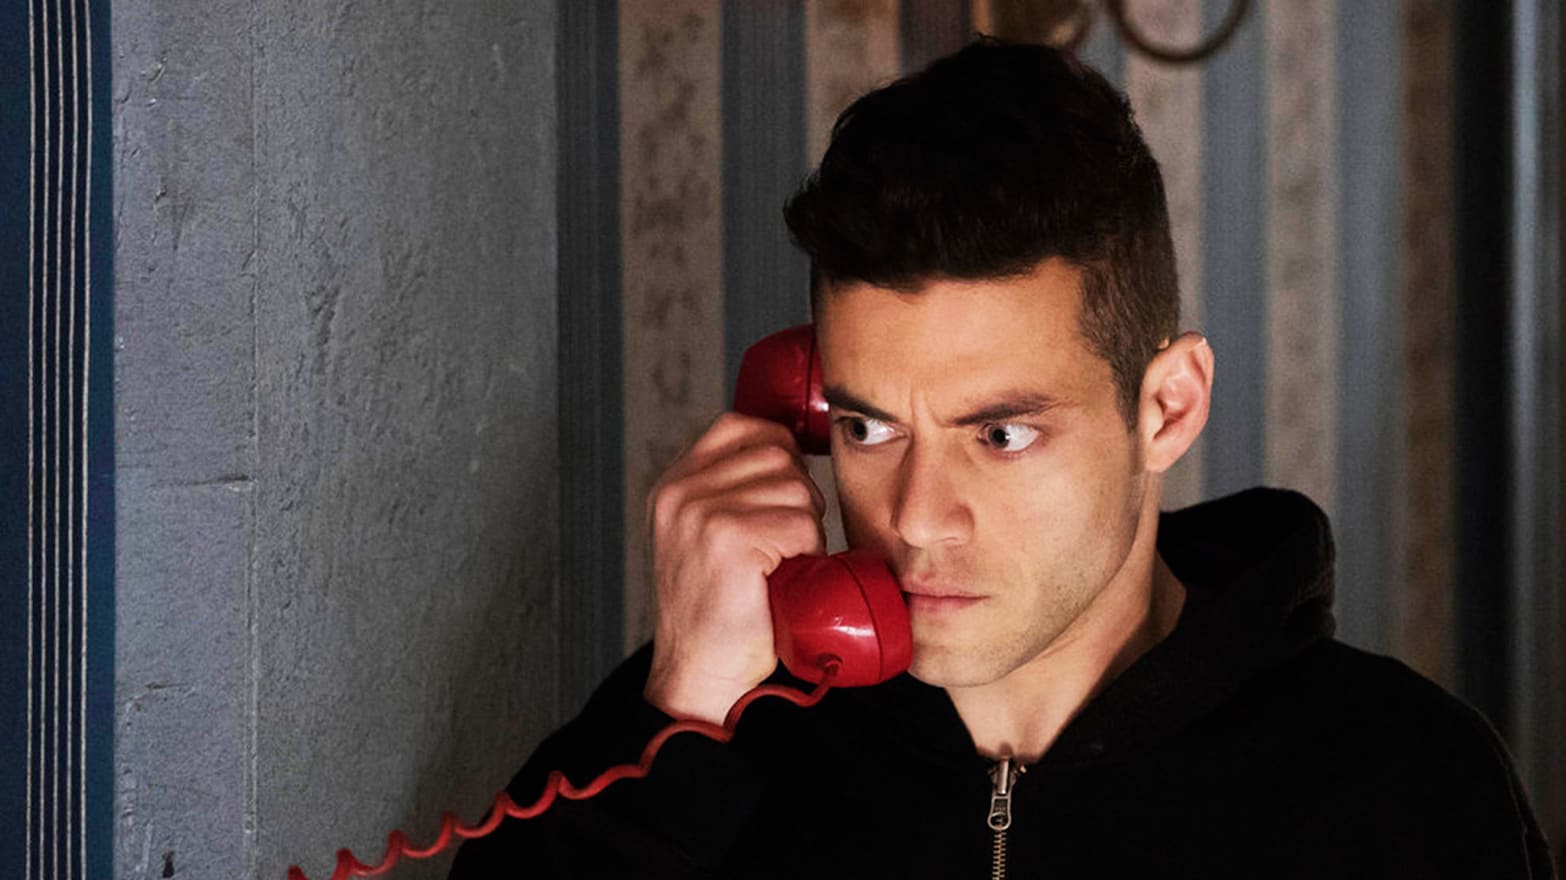 Mr. Robot' Finale Postponed Because of Similarity to Live TV Killings